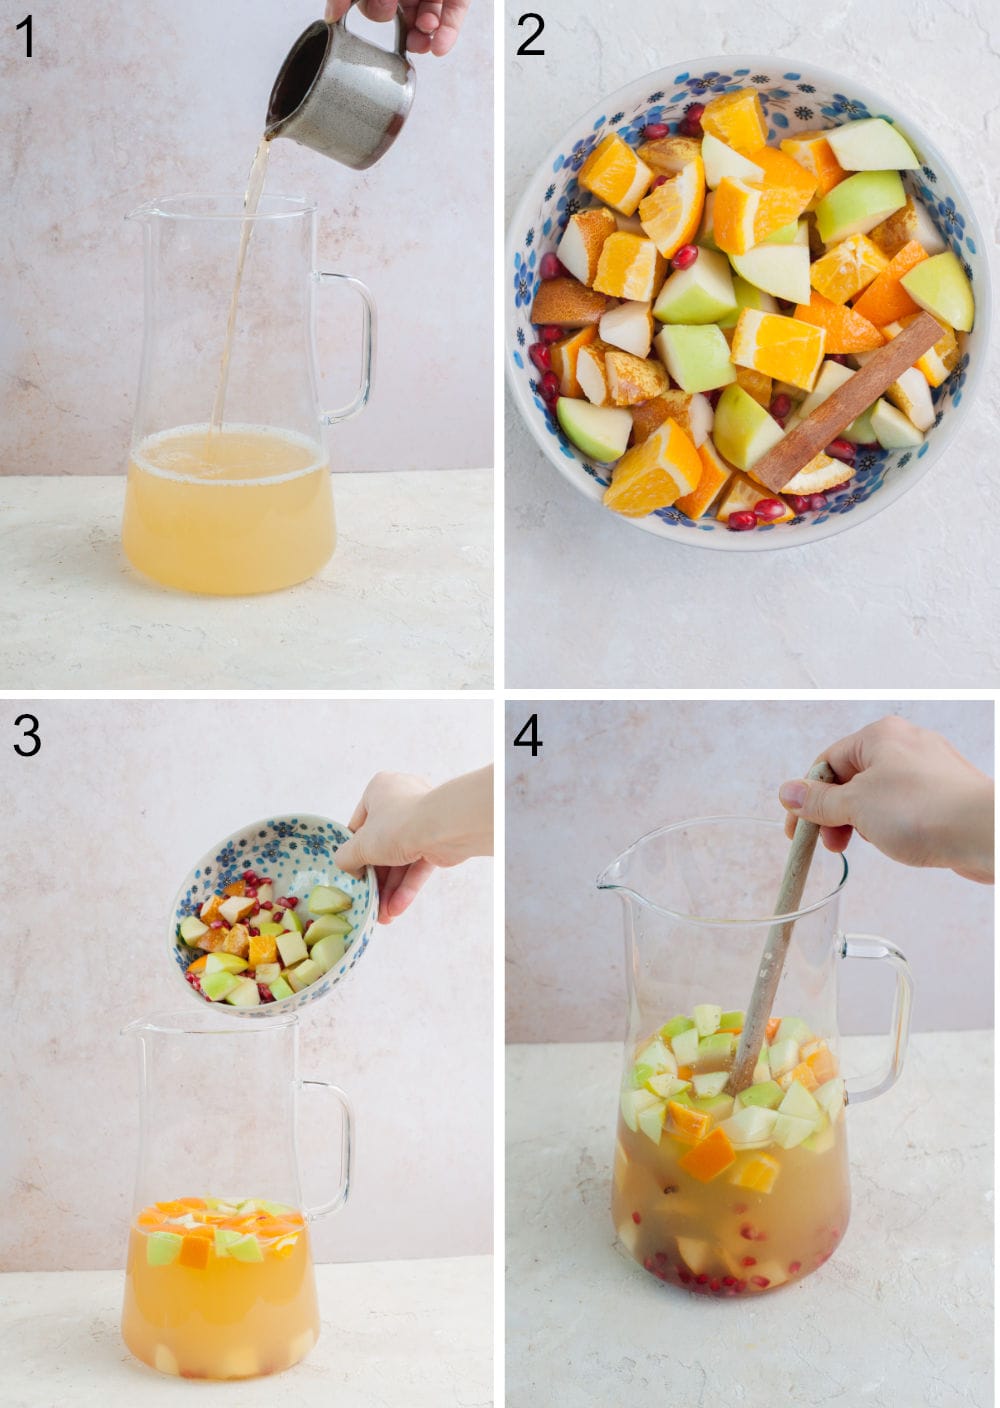 A collage of 4 photos showing how to prepare apple cider sangria.